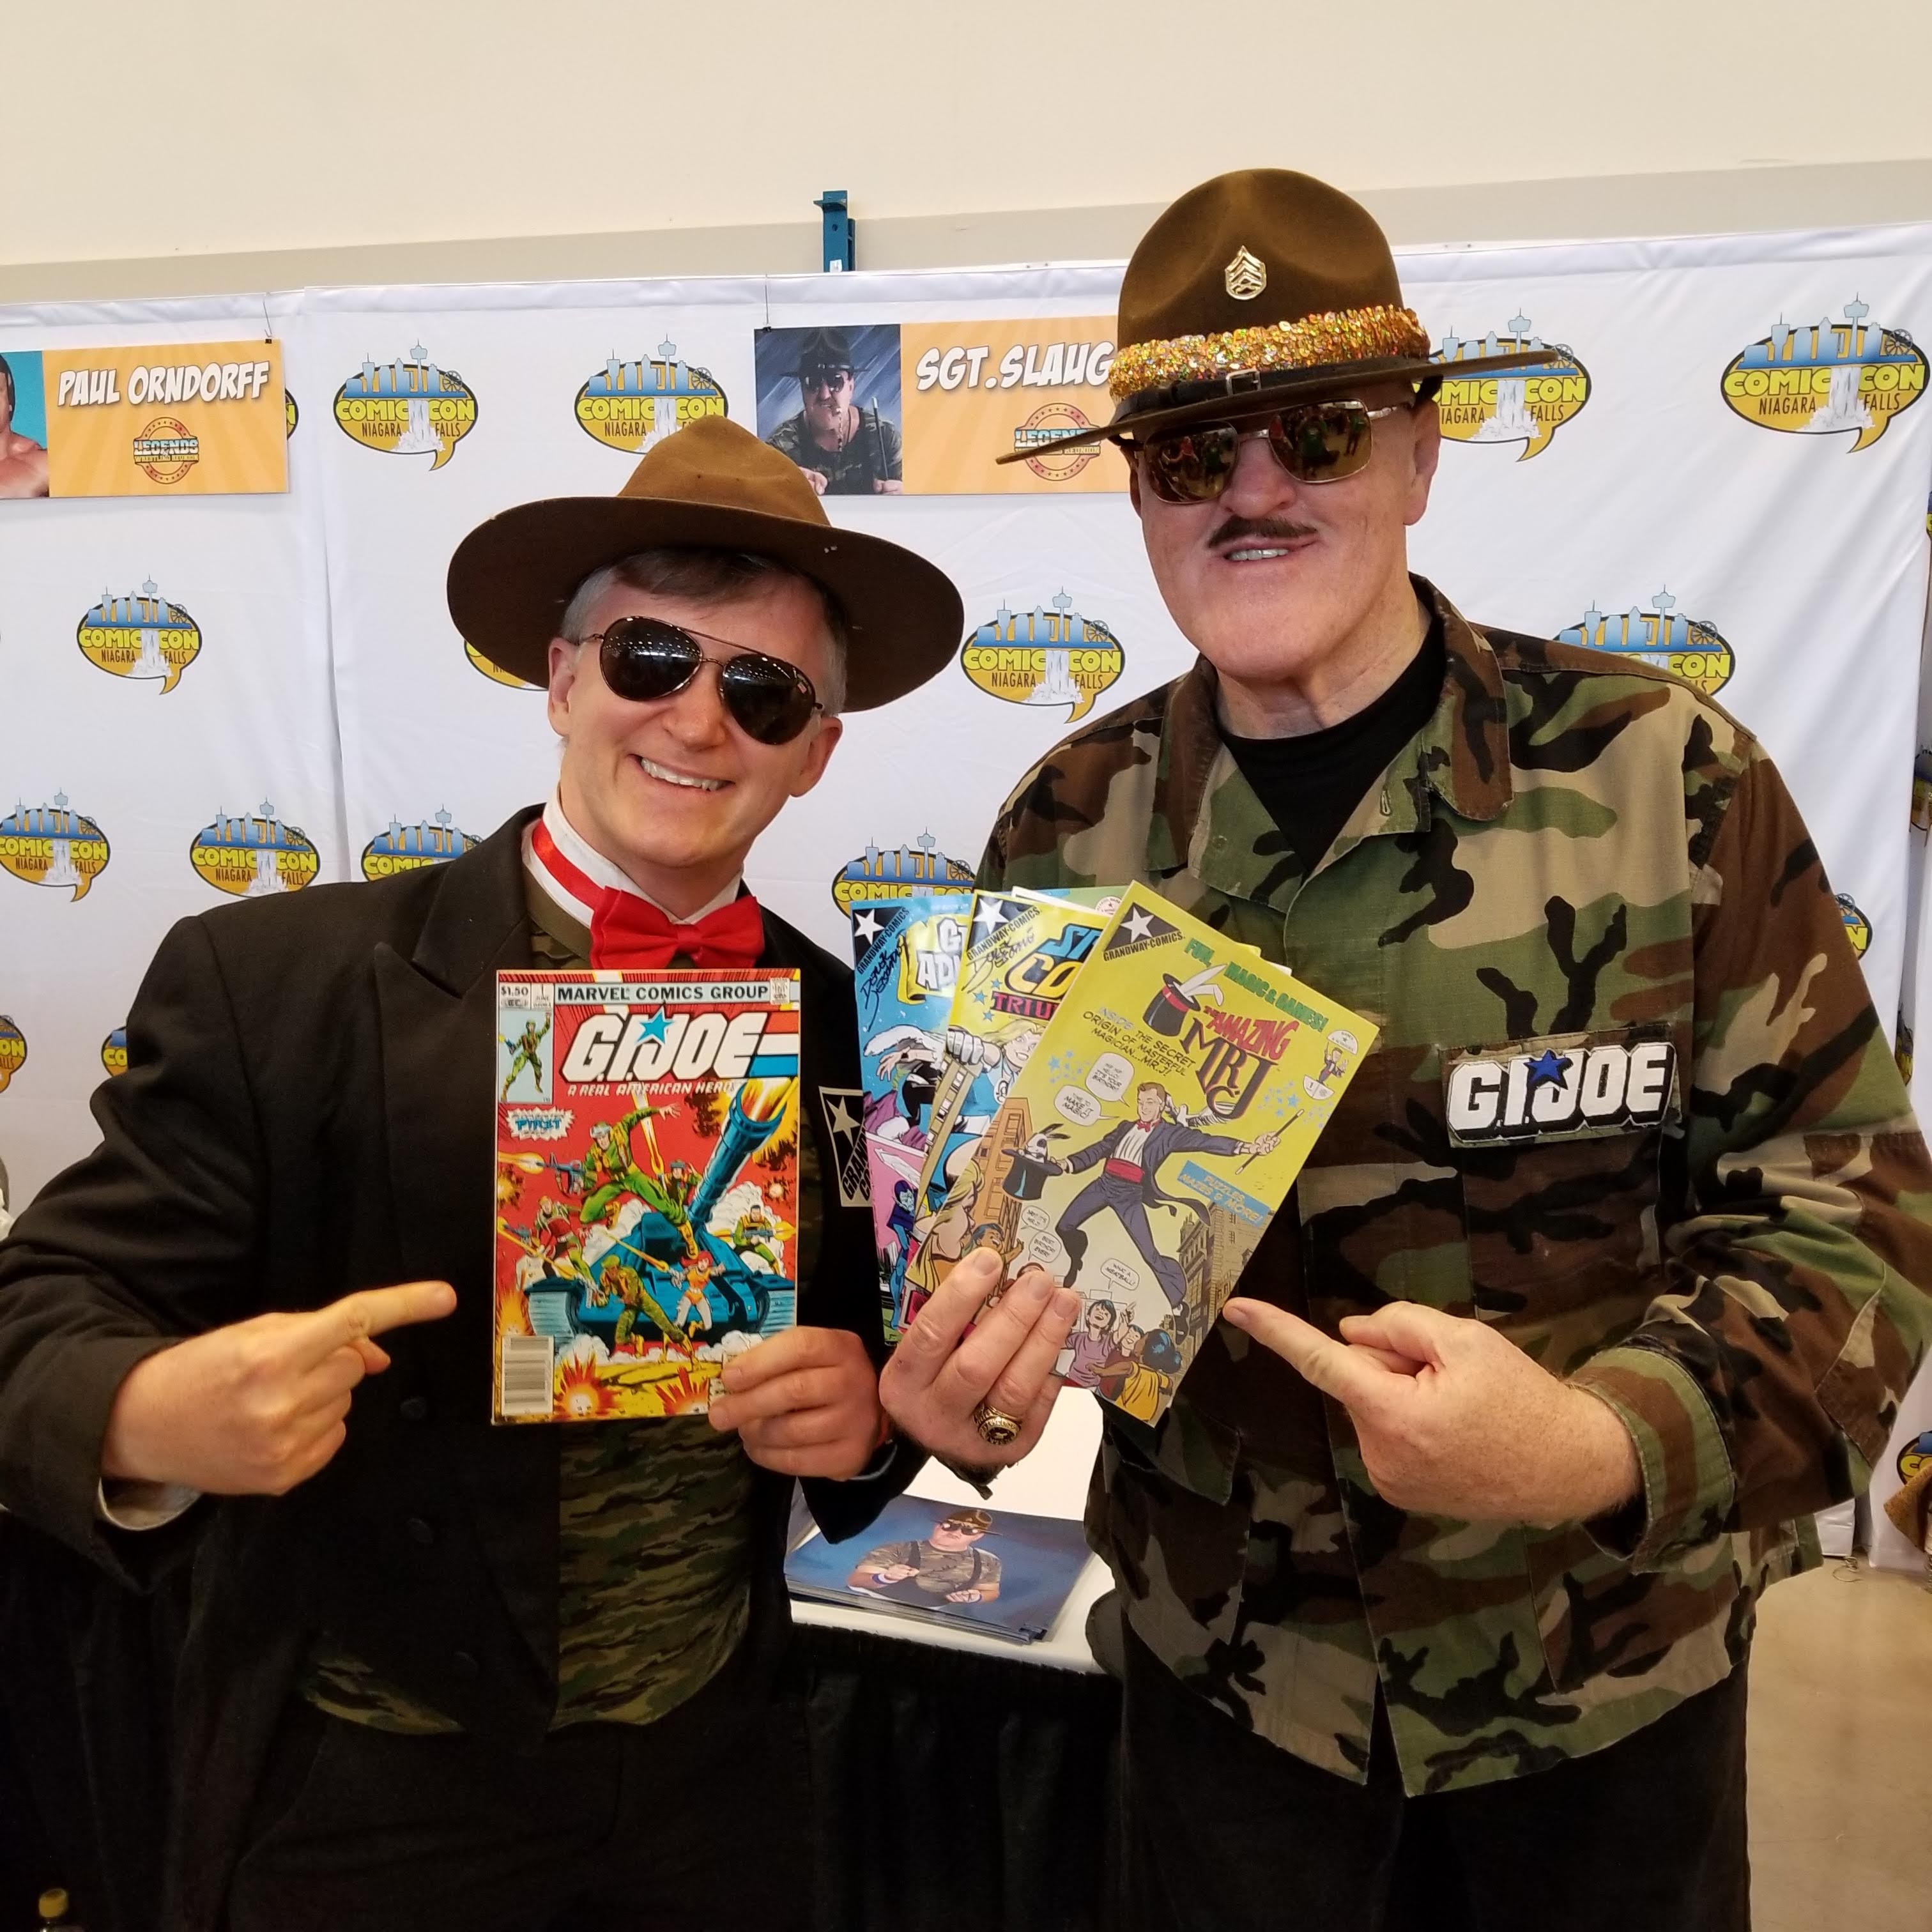 Sgt. Slaughter (Looking at each others comics!)